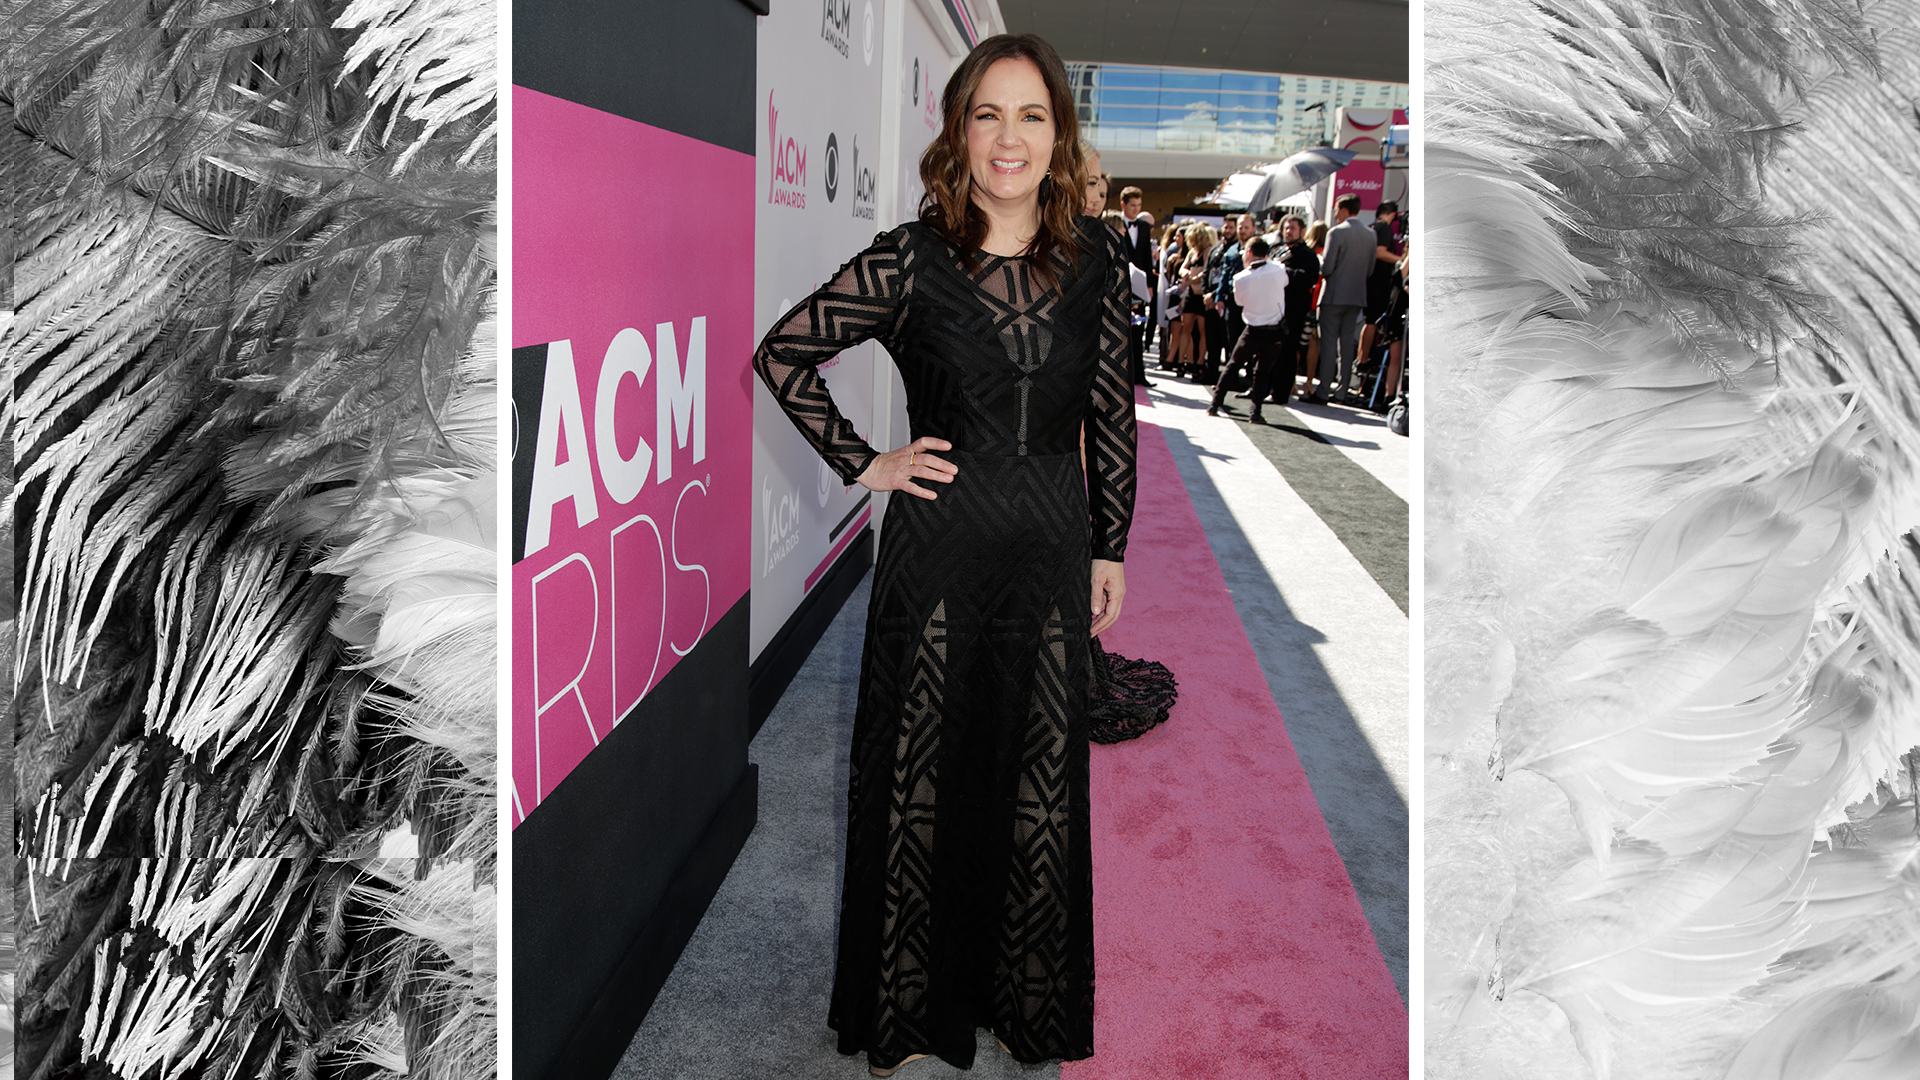 Songwriter Lori McKenna is beautiful in black with geometric-patterned lace accents.